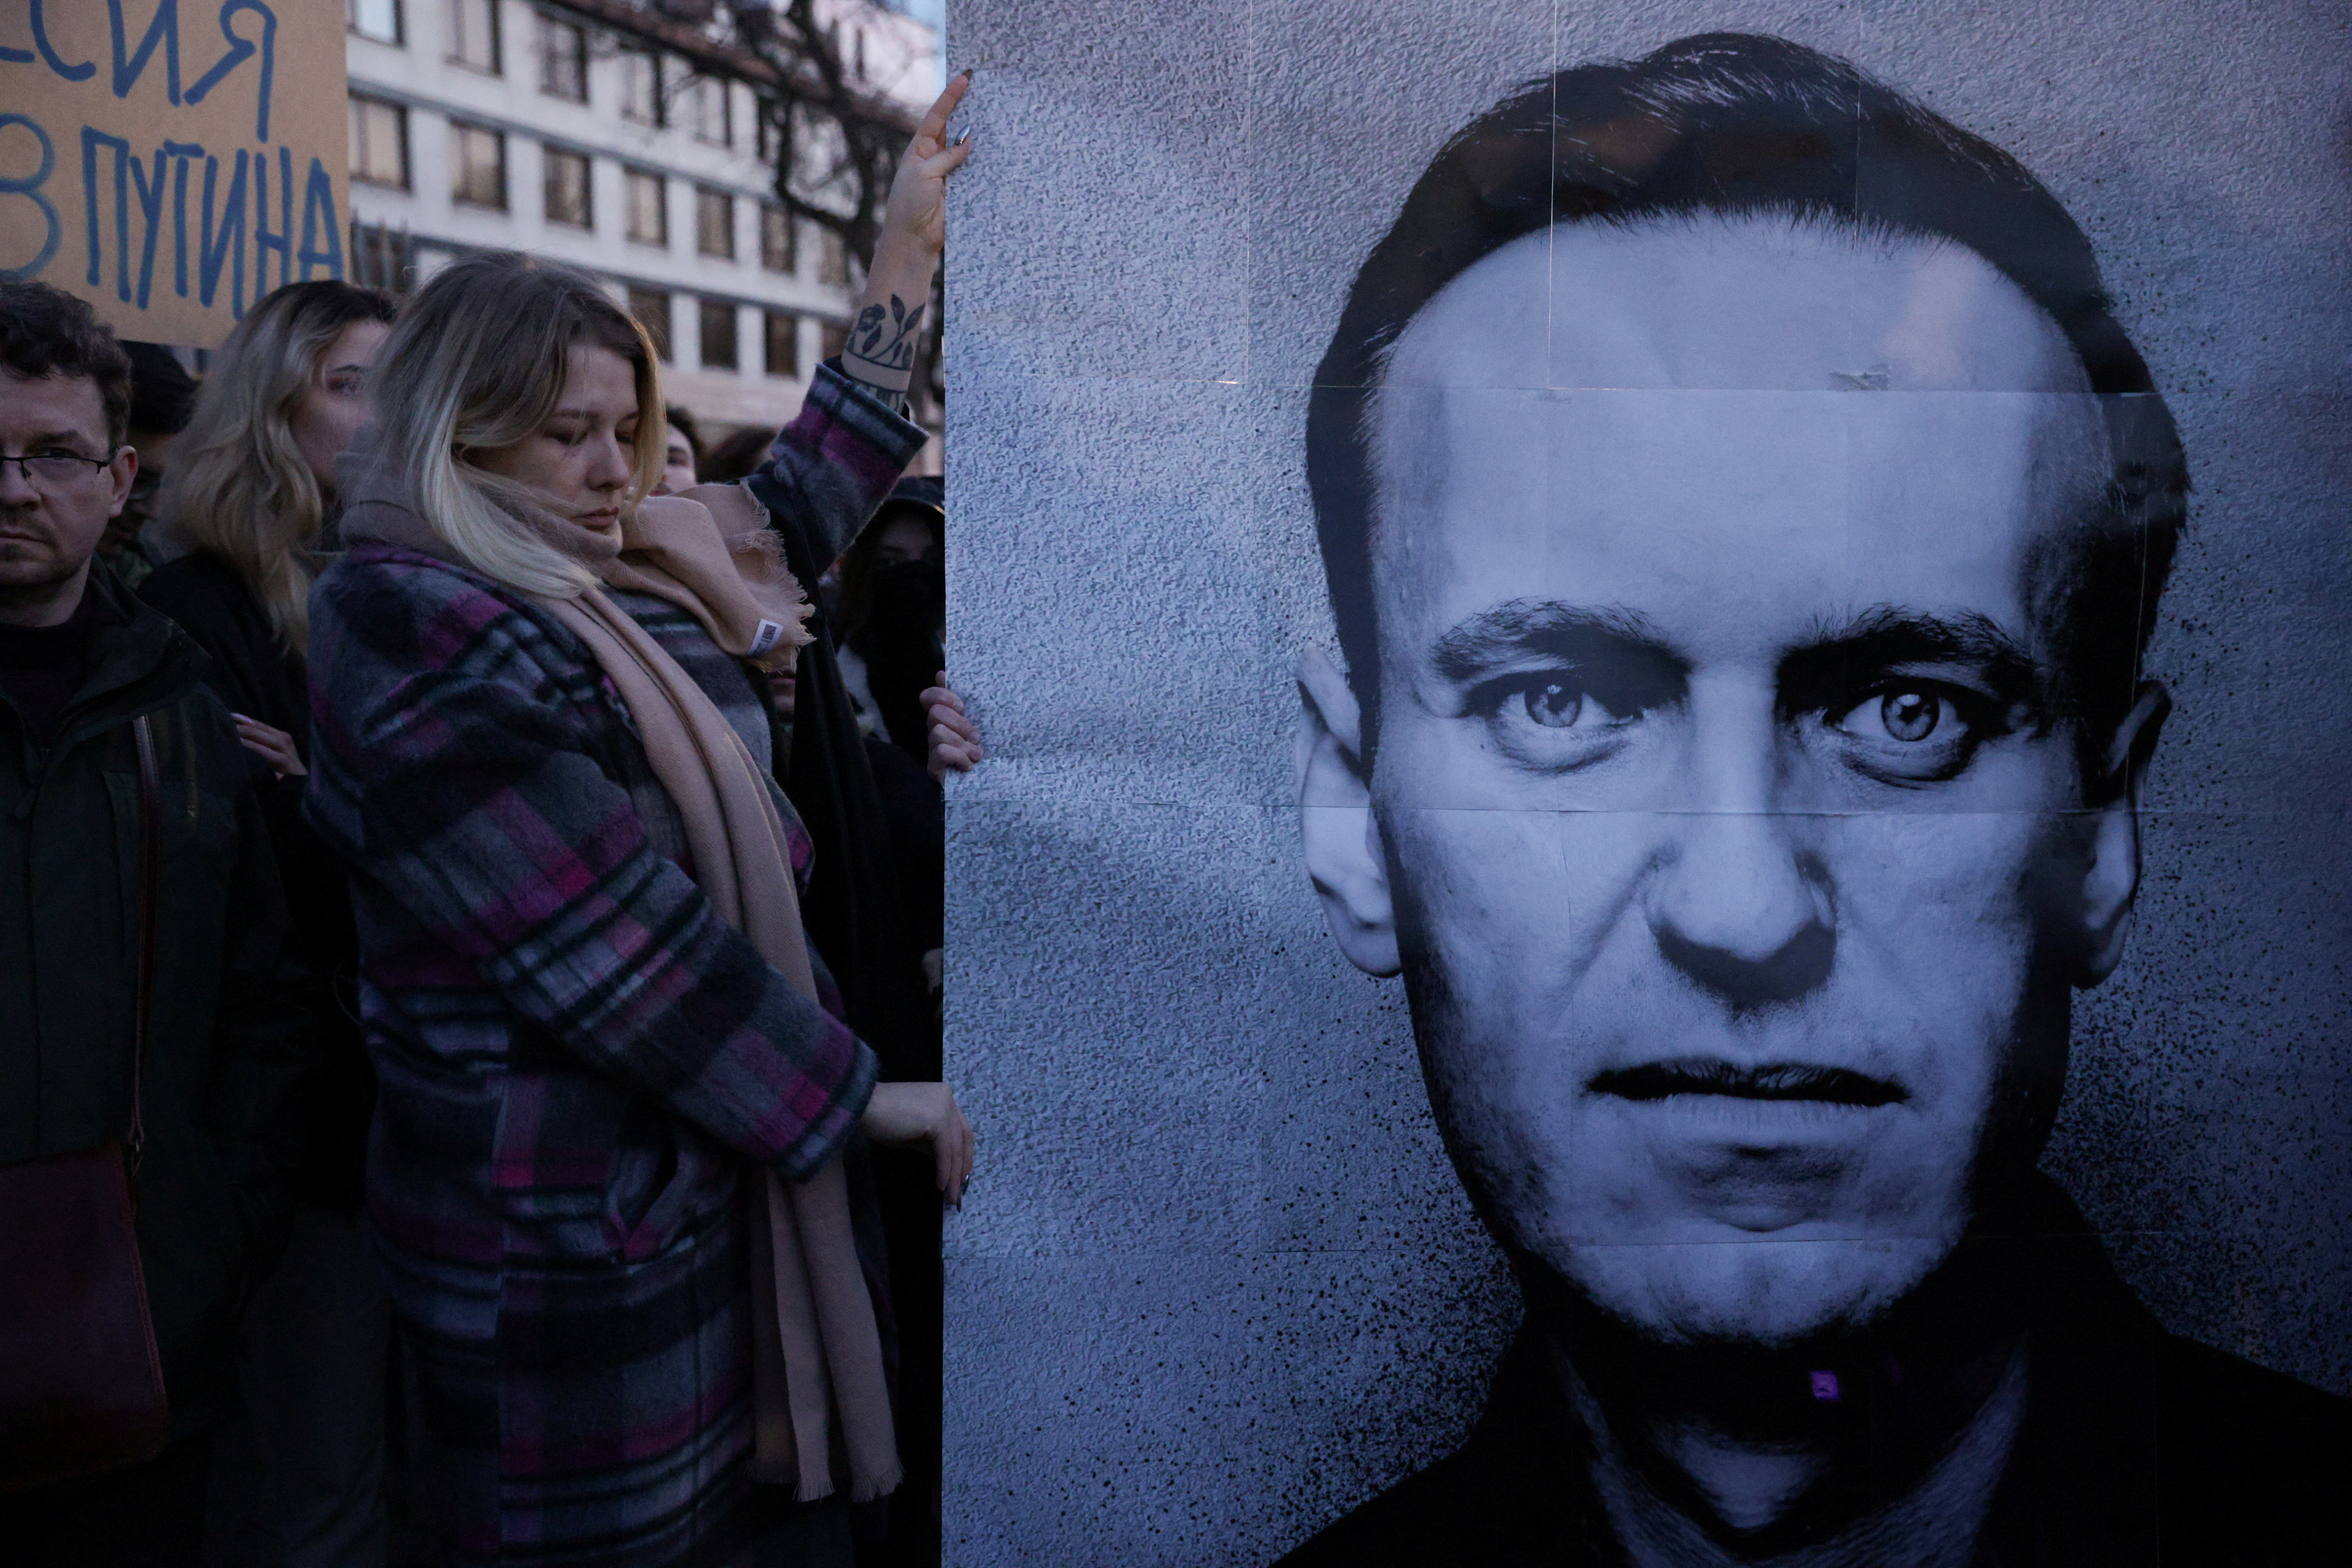 People gather outside the Russian embassy in Warsaw, Poland, following the death of Russian opposition figure Alexey Navalny, on February 16.